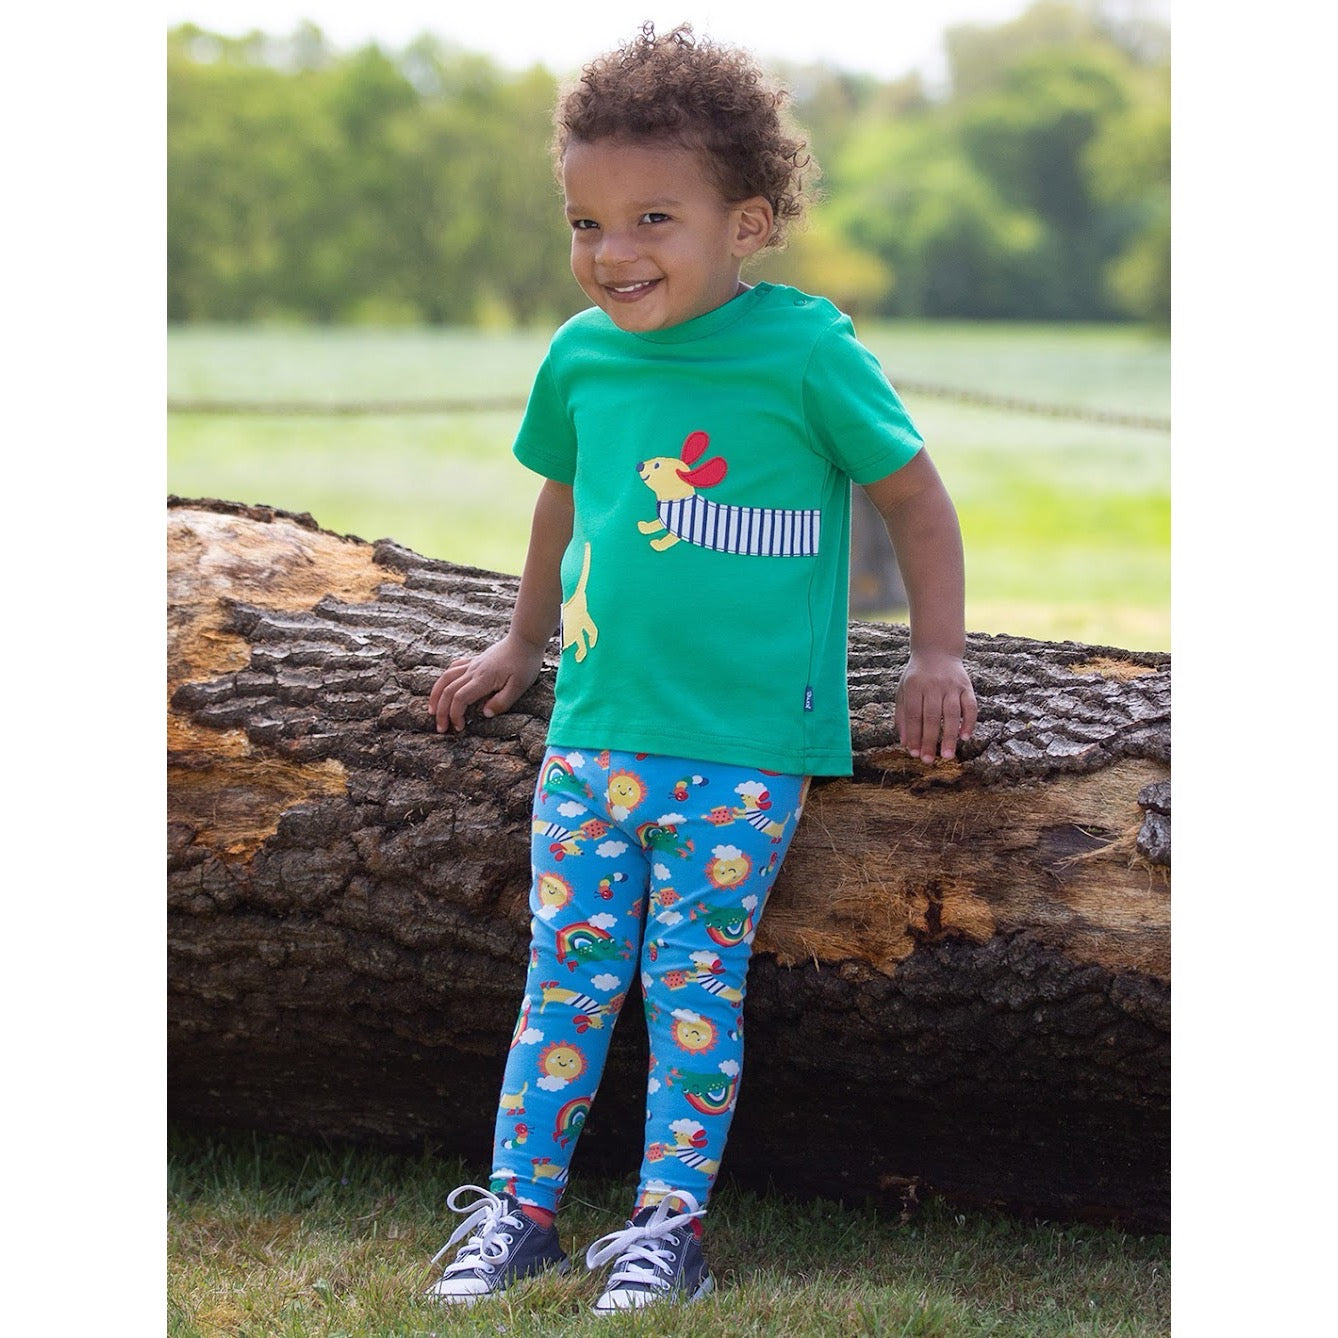 Kite Silly Sausage Infant T-Shirt 41-9997 Clothing 3-6M / Green,6-9M / Green,9-12M / Green,12-18M / Green,18-24M/2Y / Green,3YRS / Green,4YRS / Green,5YRS / Green